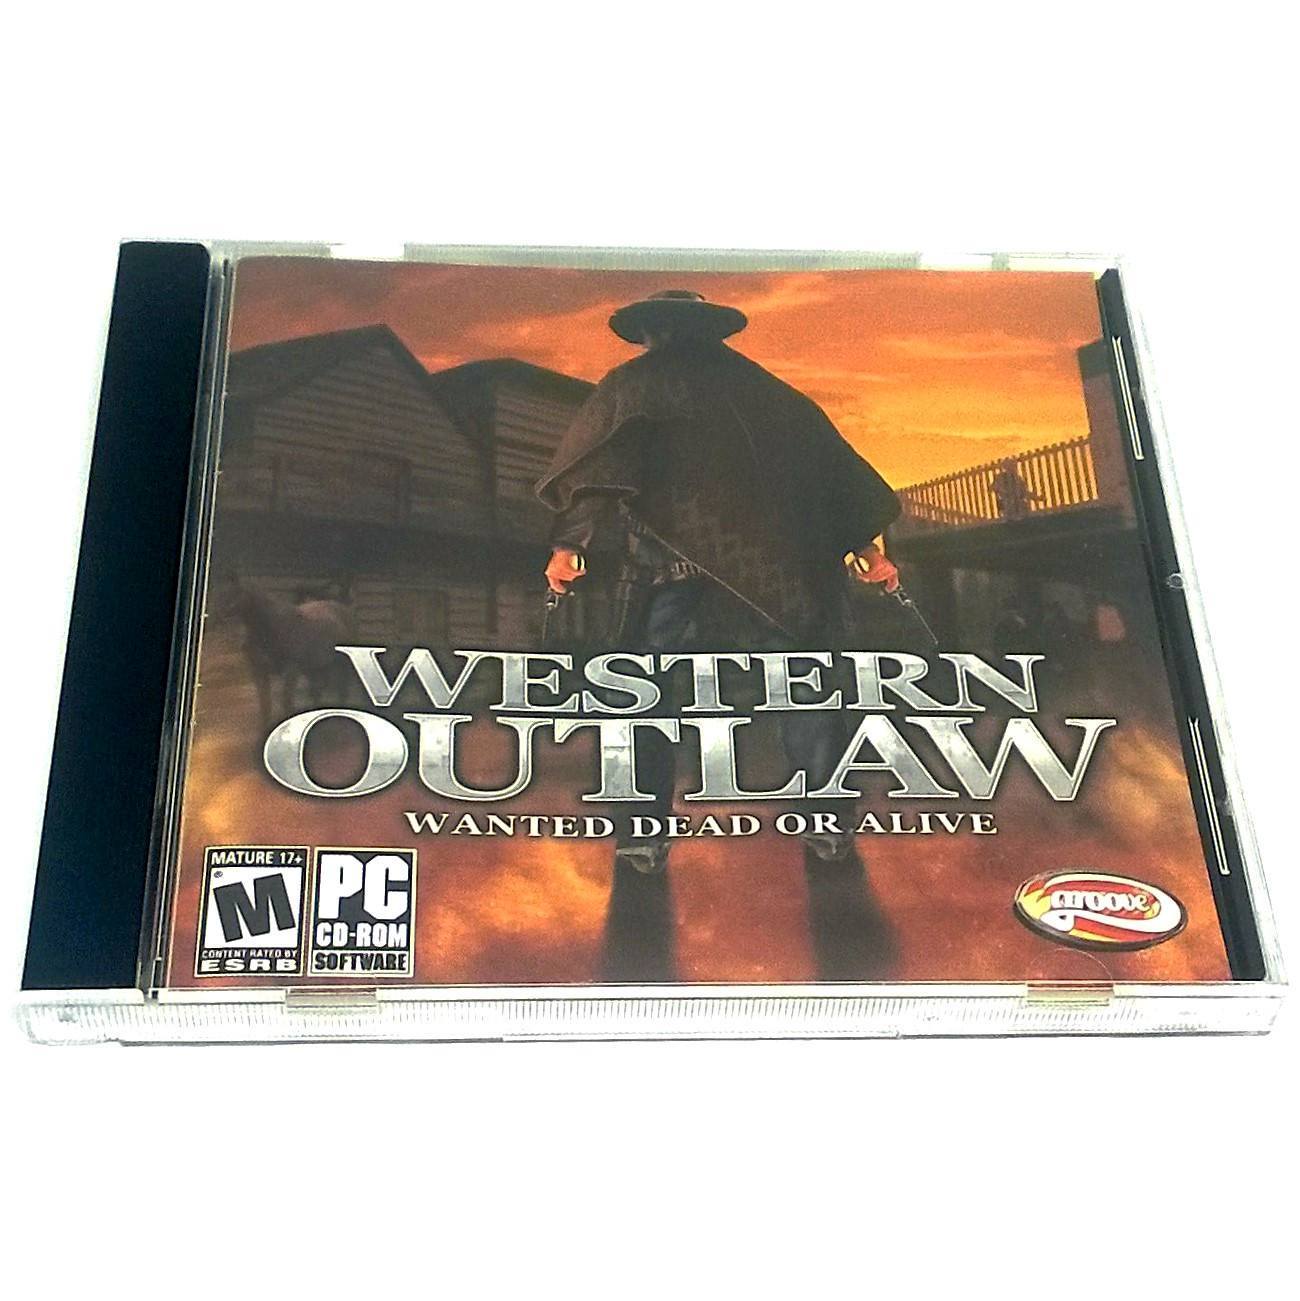 Western Outlaw: Wanted Dead or Alive for PC CD-ROM - Front of case